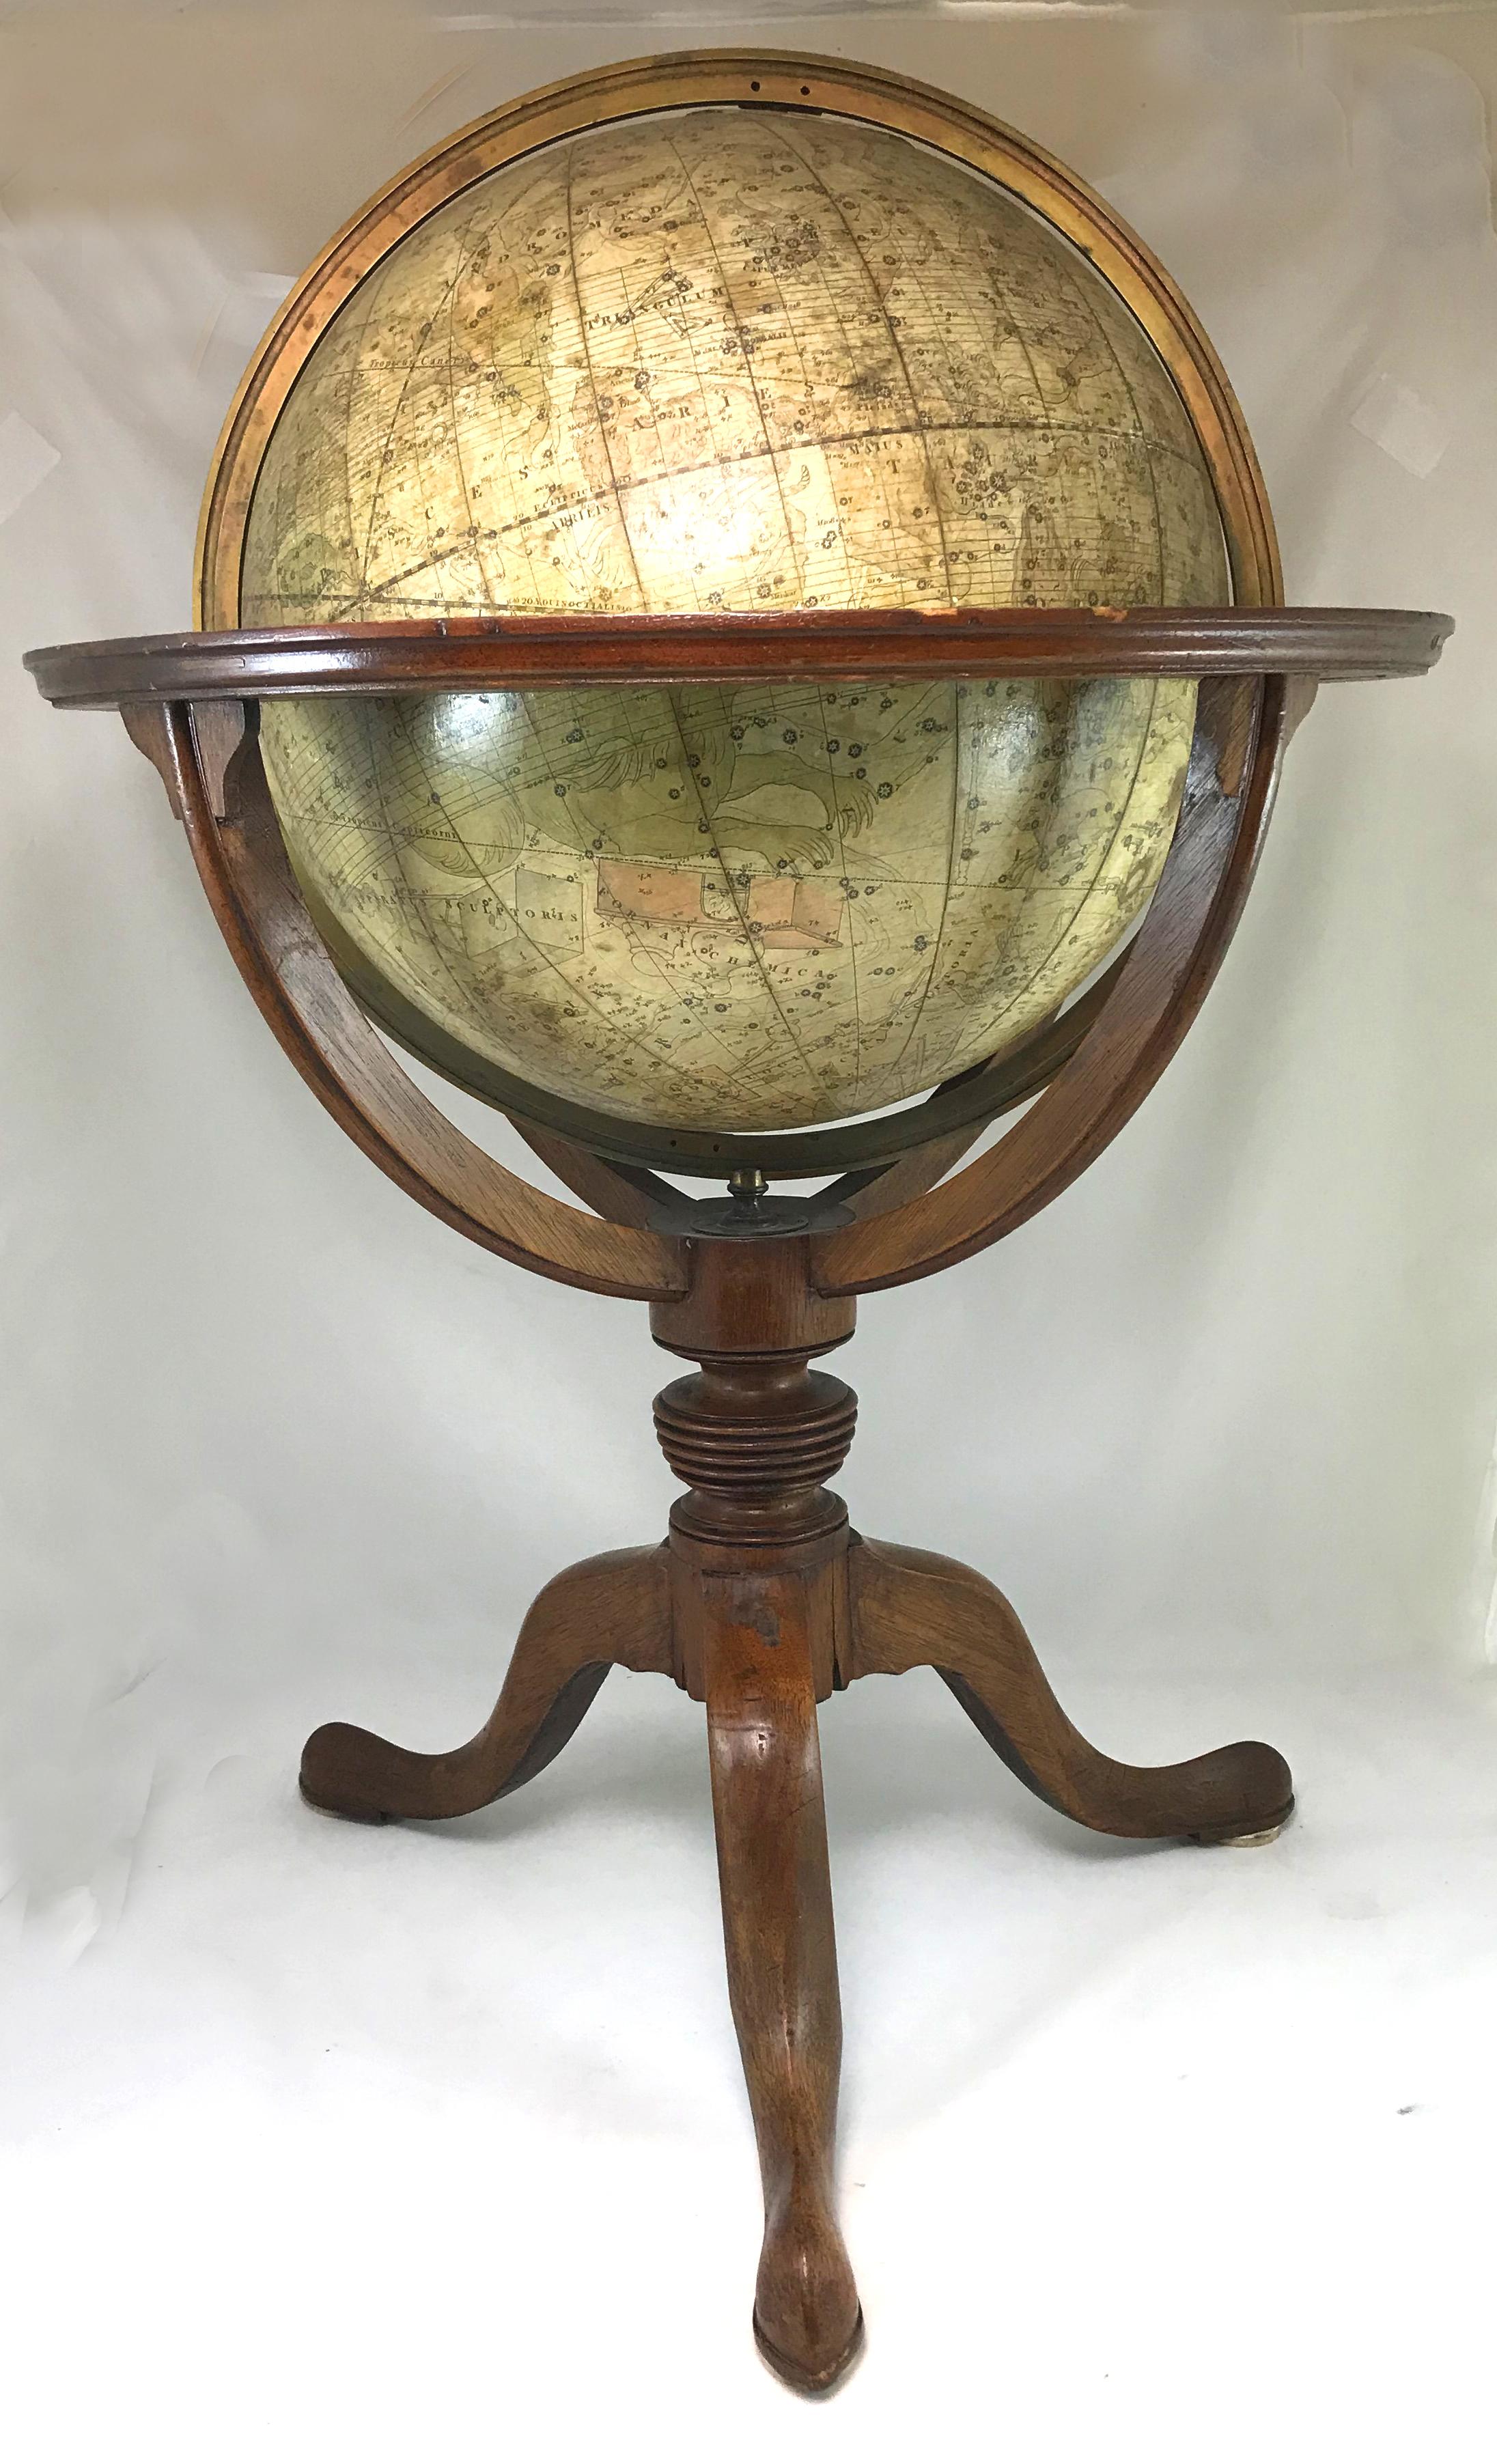 A fine assembled pair of 12-inch English table model globes on stands manufactured by J & W. Cary, the left globe with cartouche labeled “The New Celestial Globe, on which are correctly laid down over 3500 stars Selected from the most accurate